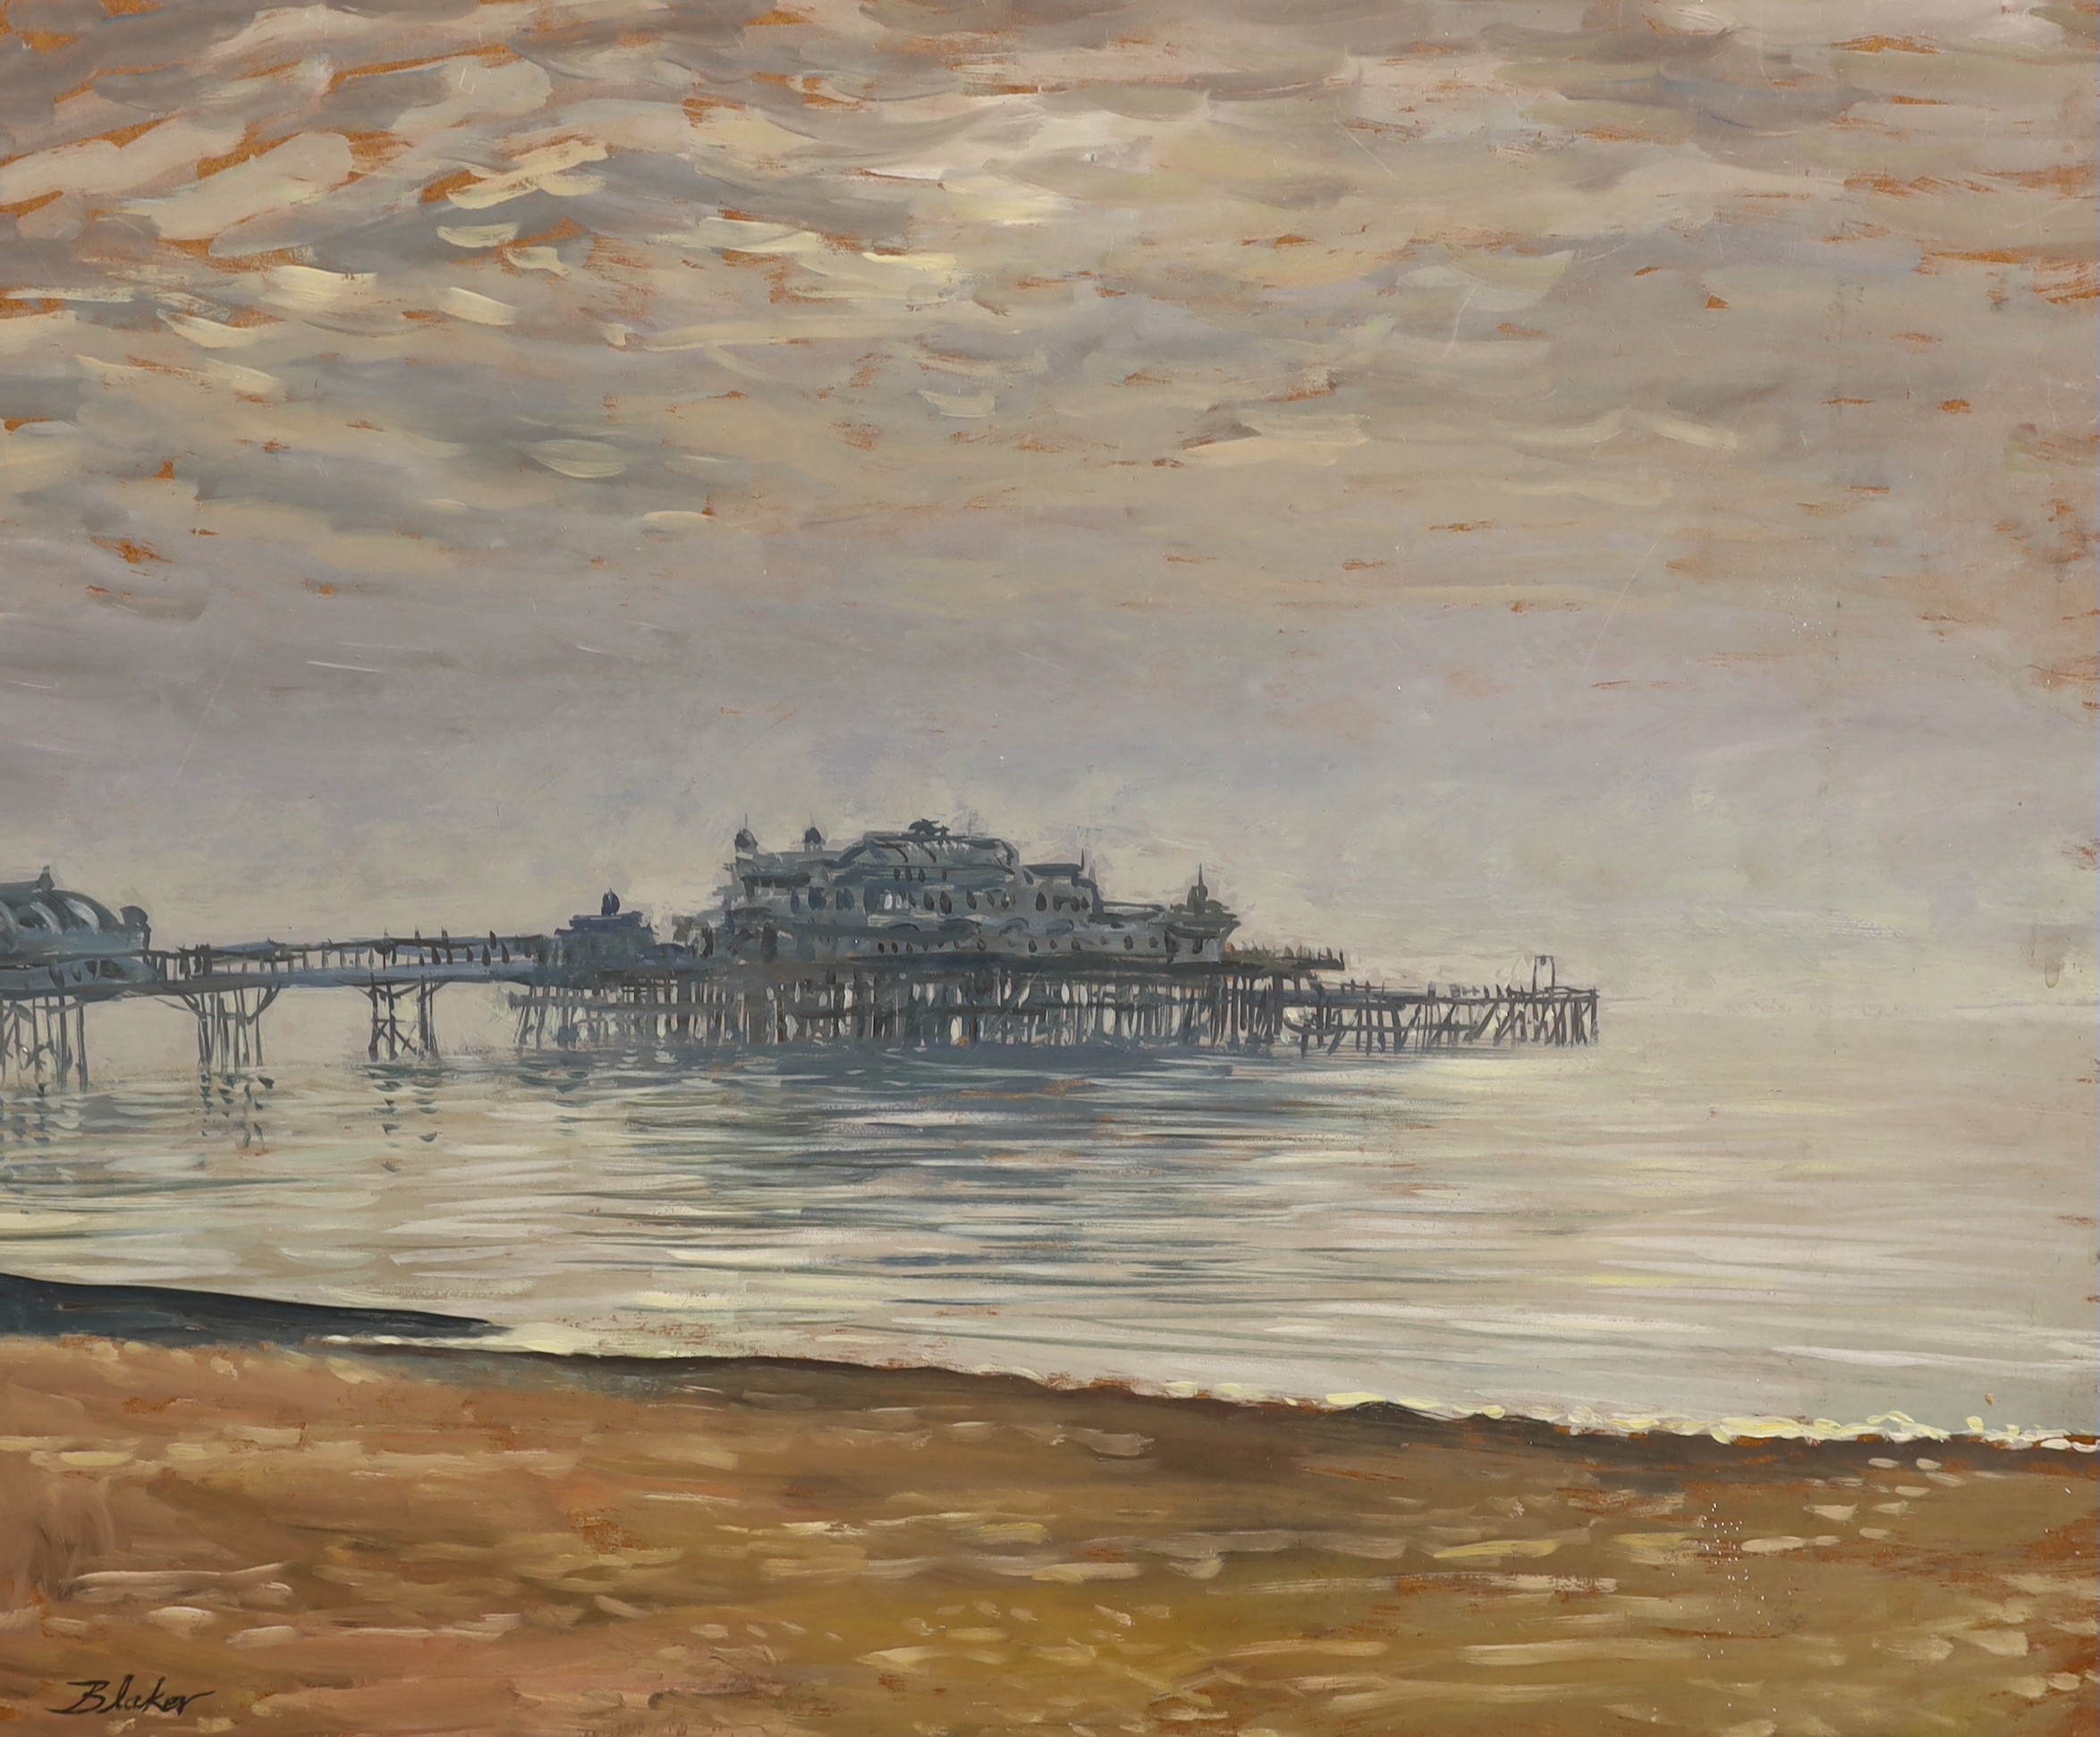 Michael Blaker (1928-2018), two oils on board, 'West Pier, Brighton' and 'View along the beach towards Shoreham', signed, 51 x 61cm, unframed